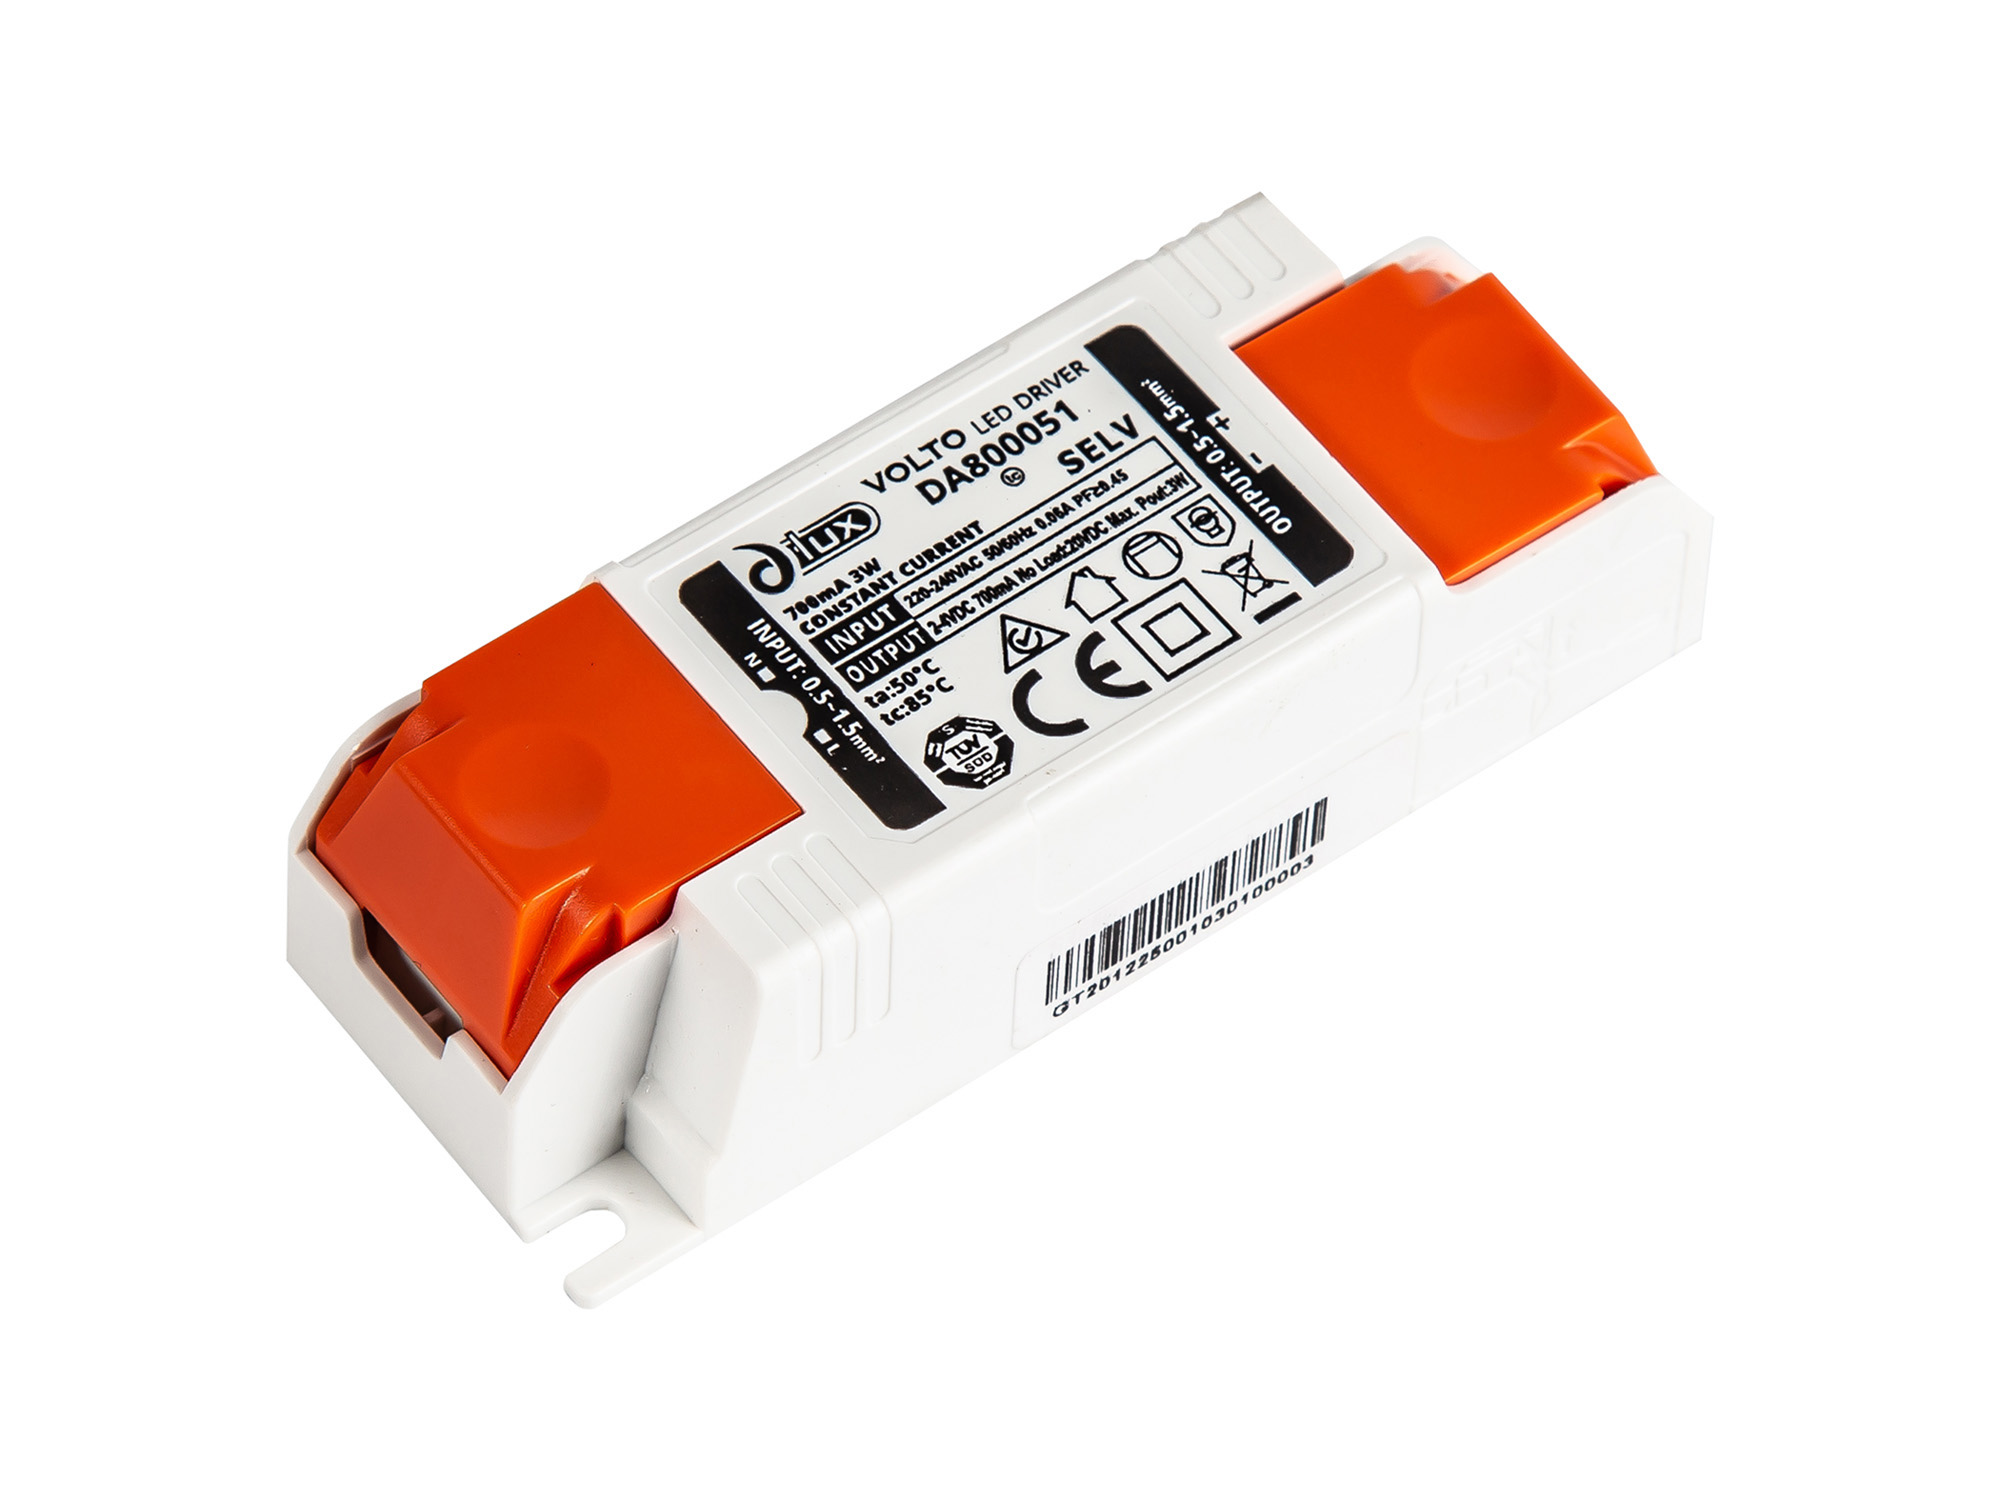 DA800051  Volto, 3W Constant Current 700mA Non-Dimmable LED Driver 2-4V Push-Fit terminal IP20